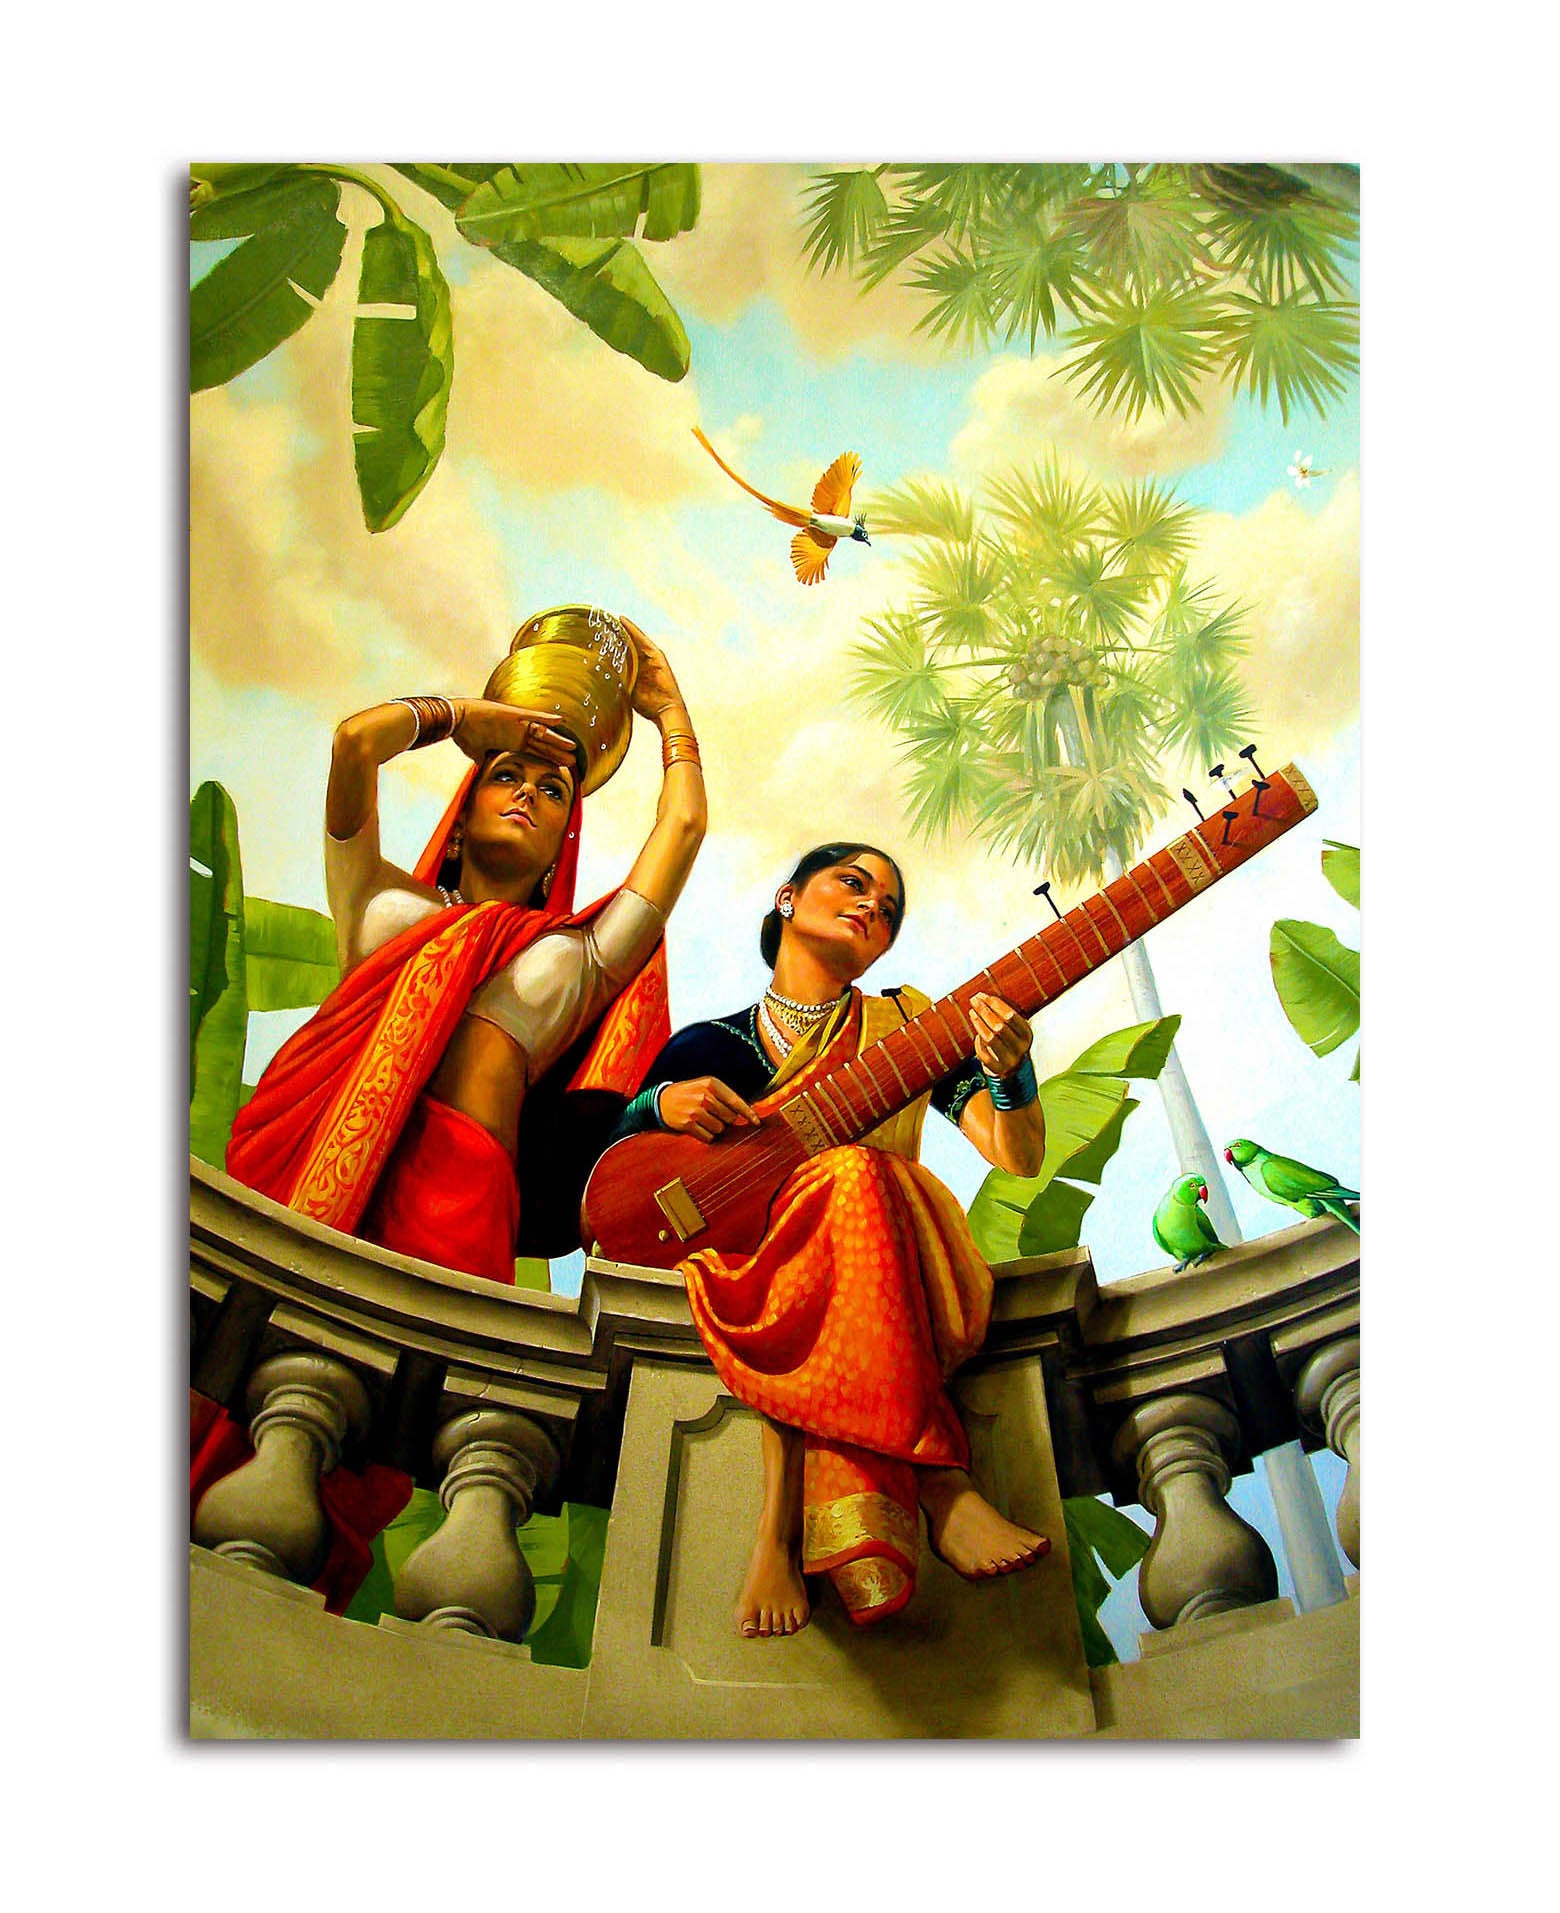 A Lady Playing Veena - Unframed Canvas Painting